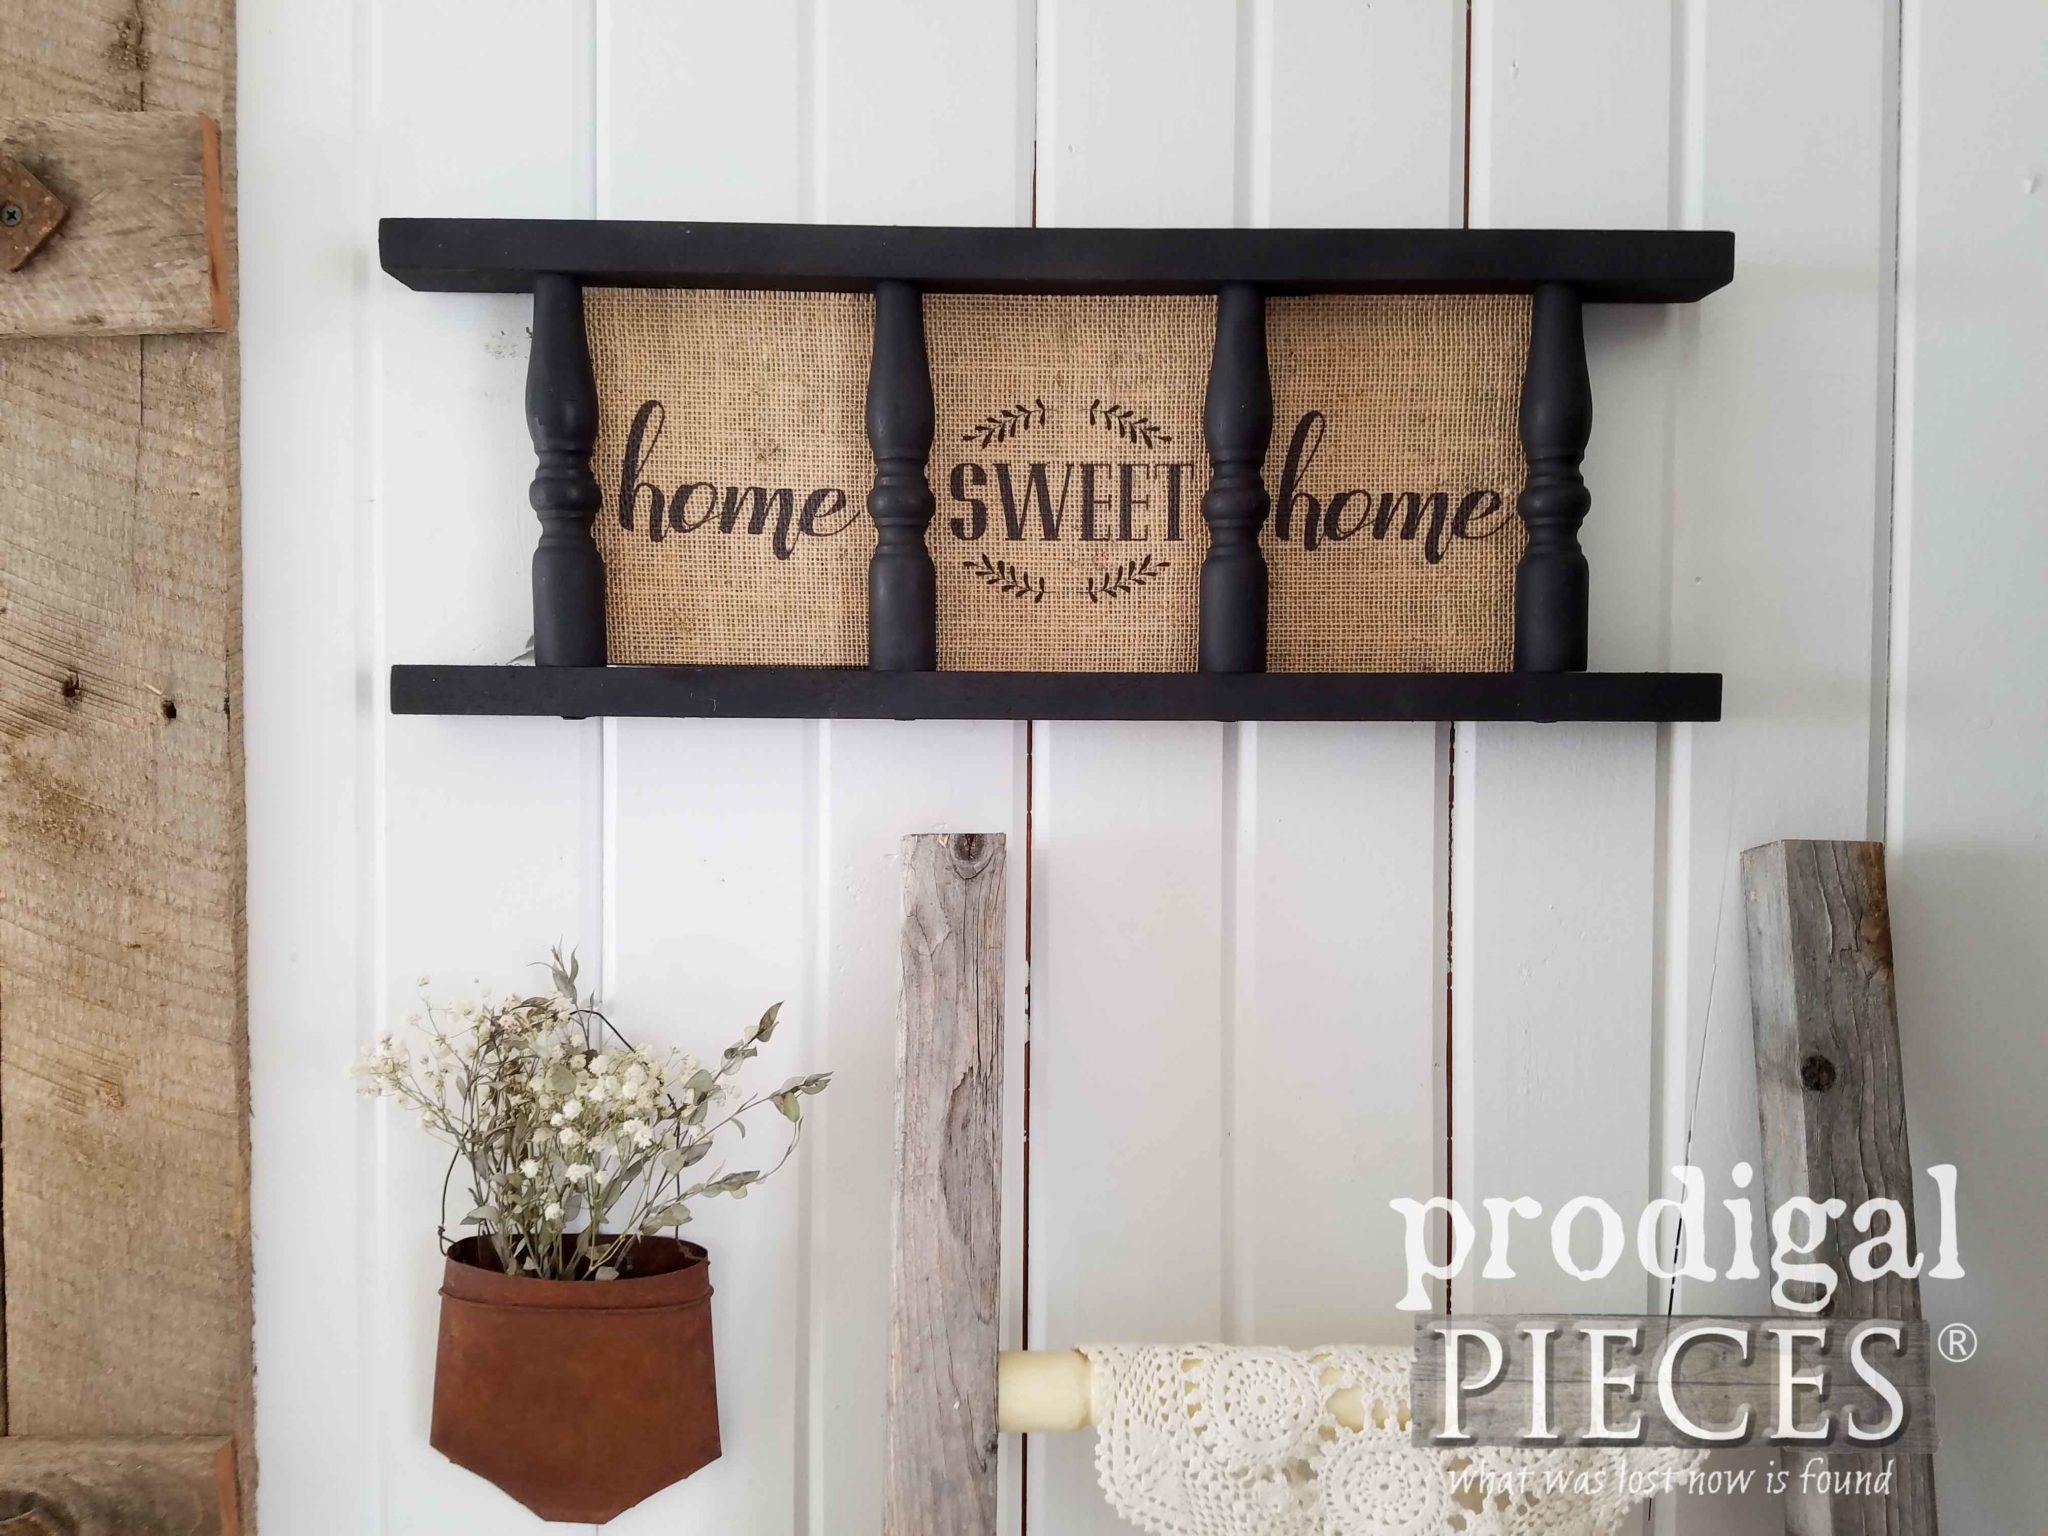 Home Sweet Home Farmhouse Sign / Wall Decor from Repurposed Side Table by Larissa & Son of Prodigal Pieces | prodigalpieces.com